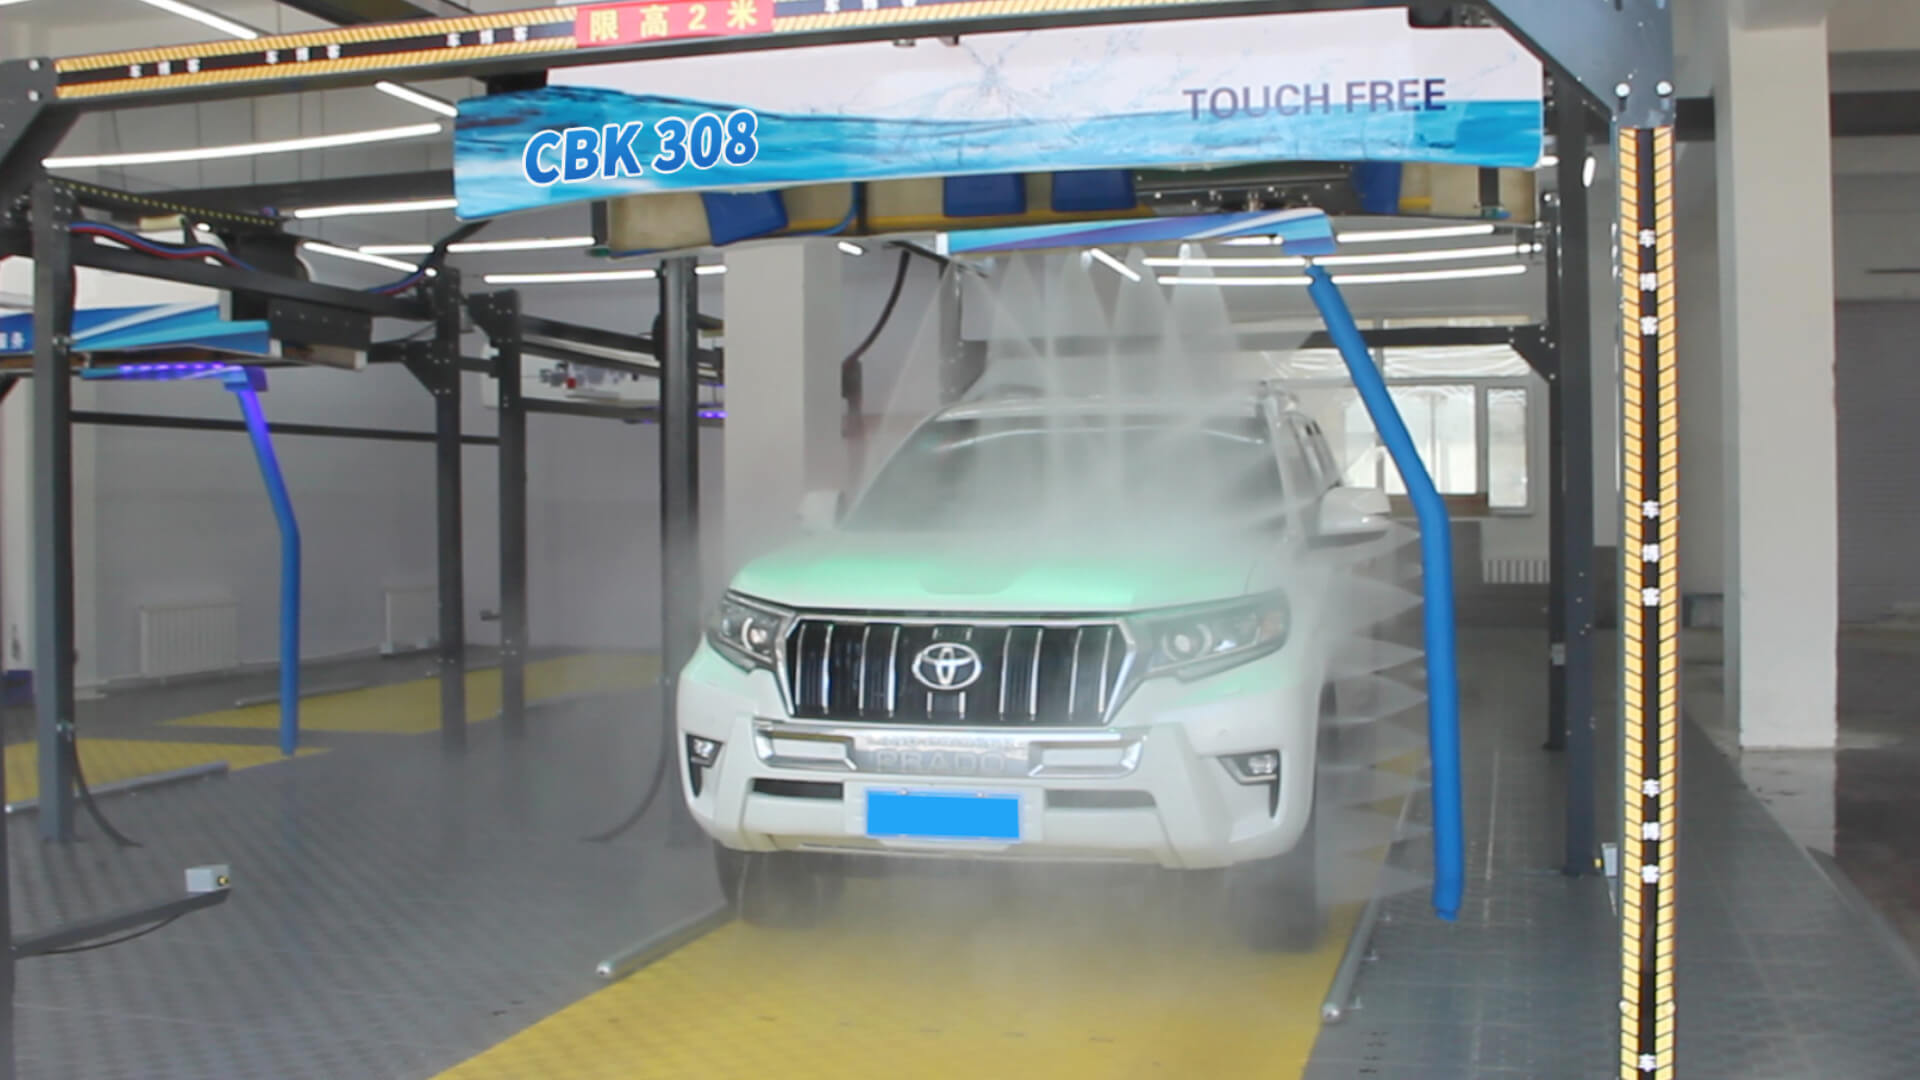 How to Use an Automated Car Wash